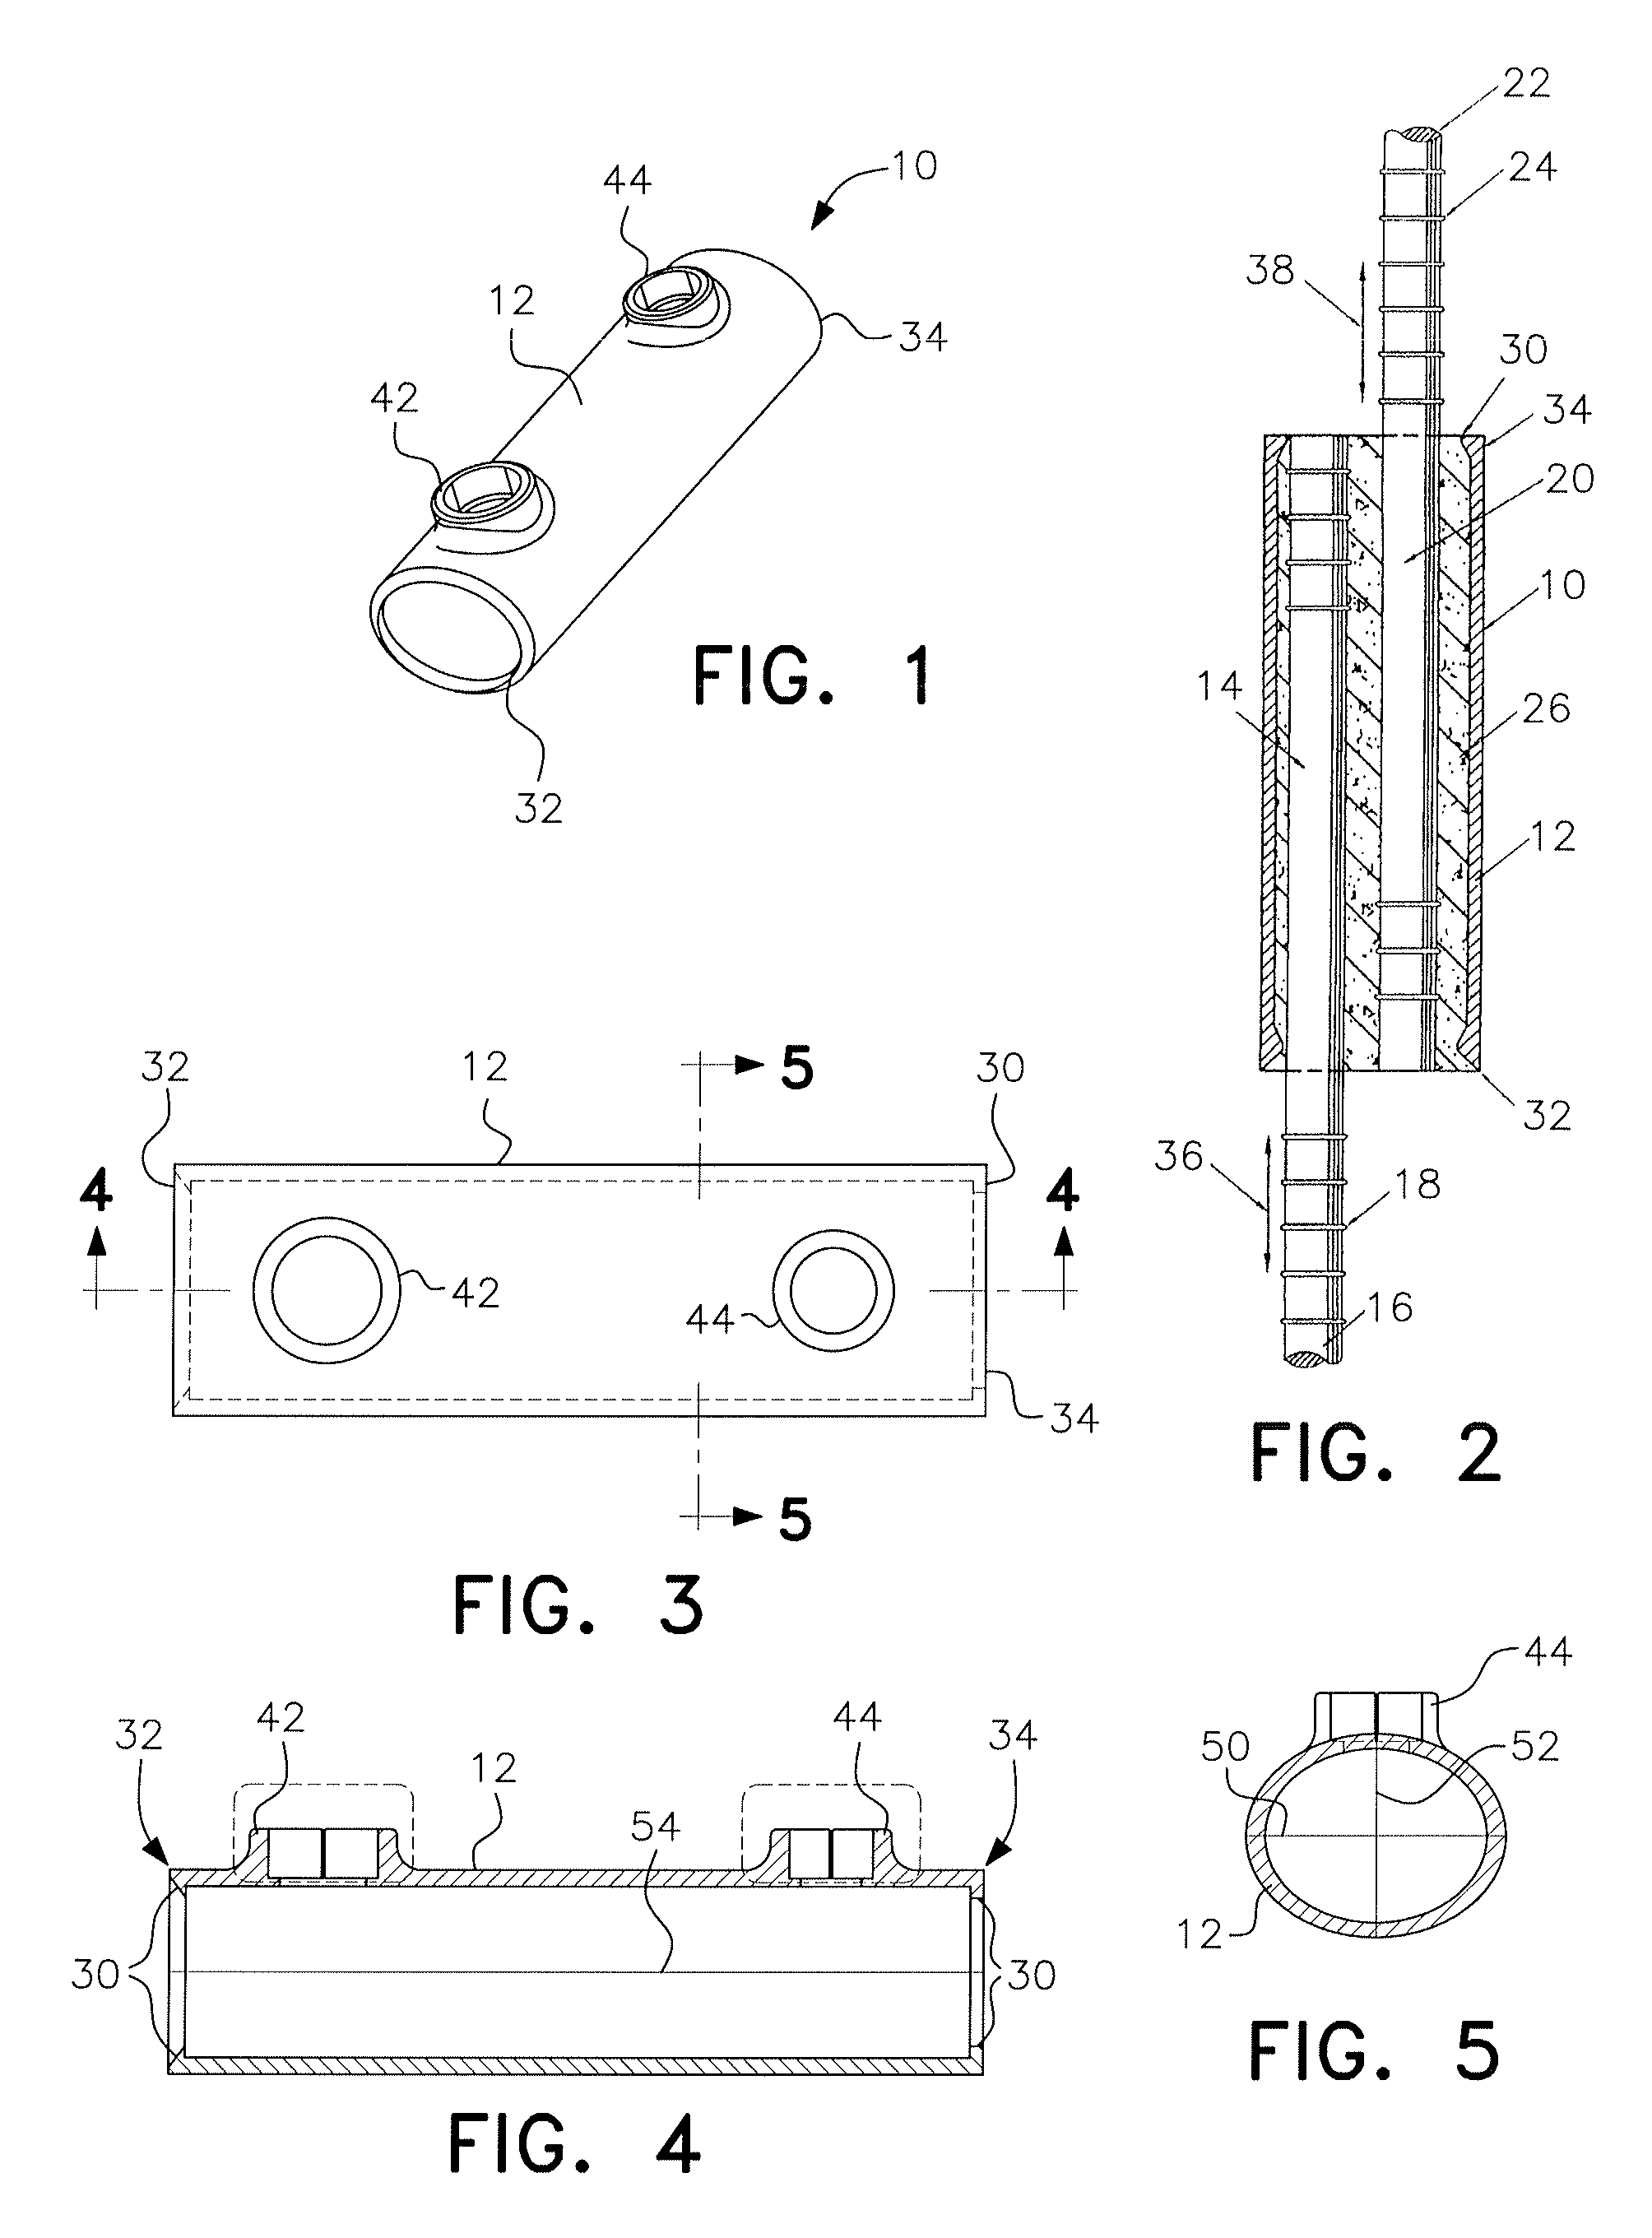 Splice sleeve with elliptical or compound curve cross section